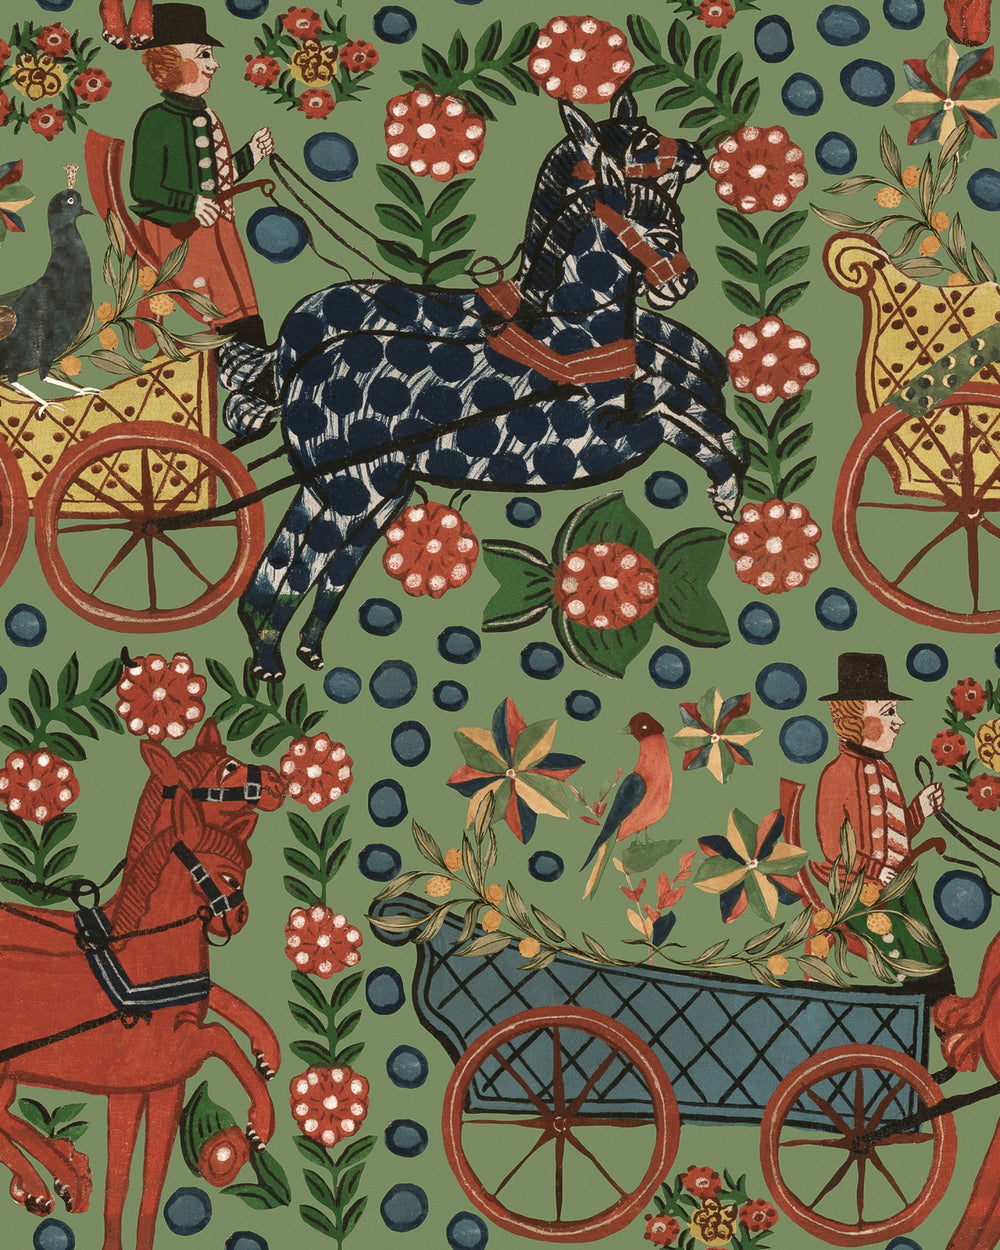 Mind-the-gap-wallpaper-WP20679-Tyrol-collection-Fasnacht-wallpaper-Absinth-illustrated-painertly-alpine-apres-ski-Tyrol-green-painted-coachman-horses-mural-Nordic-Folklore-pattern